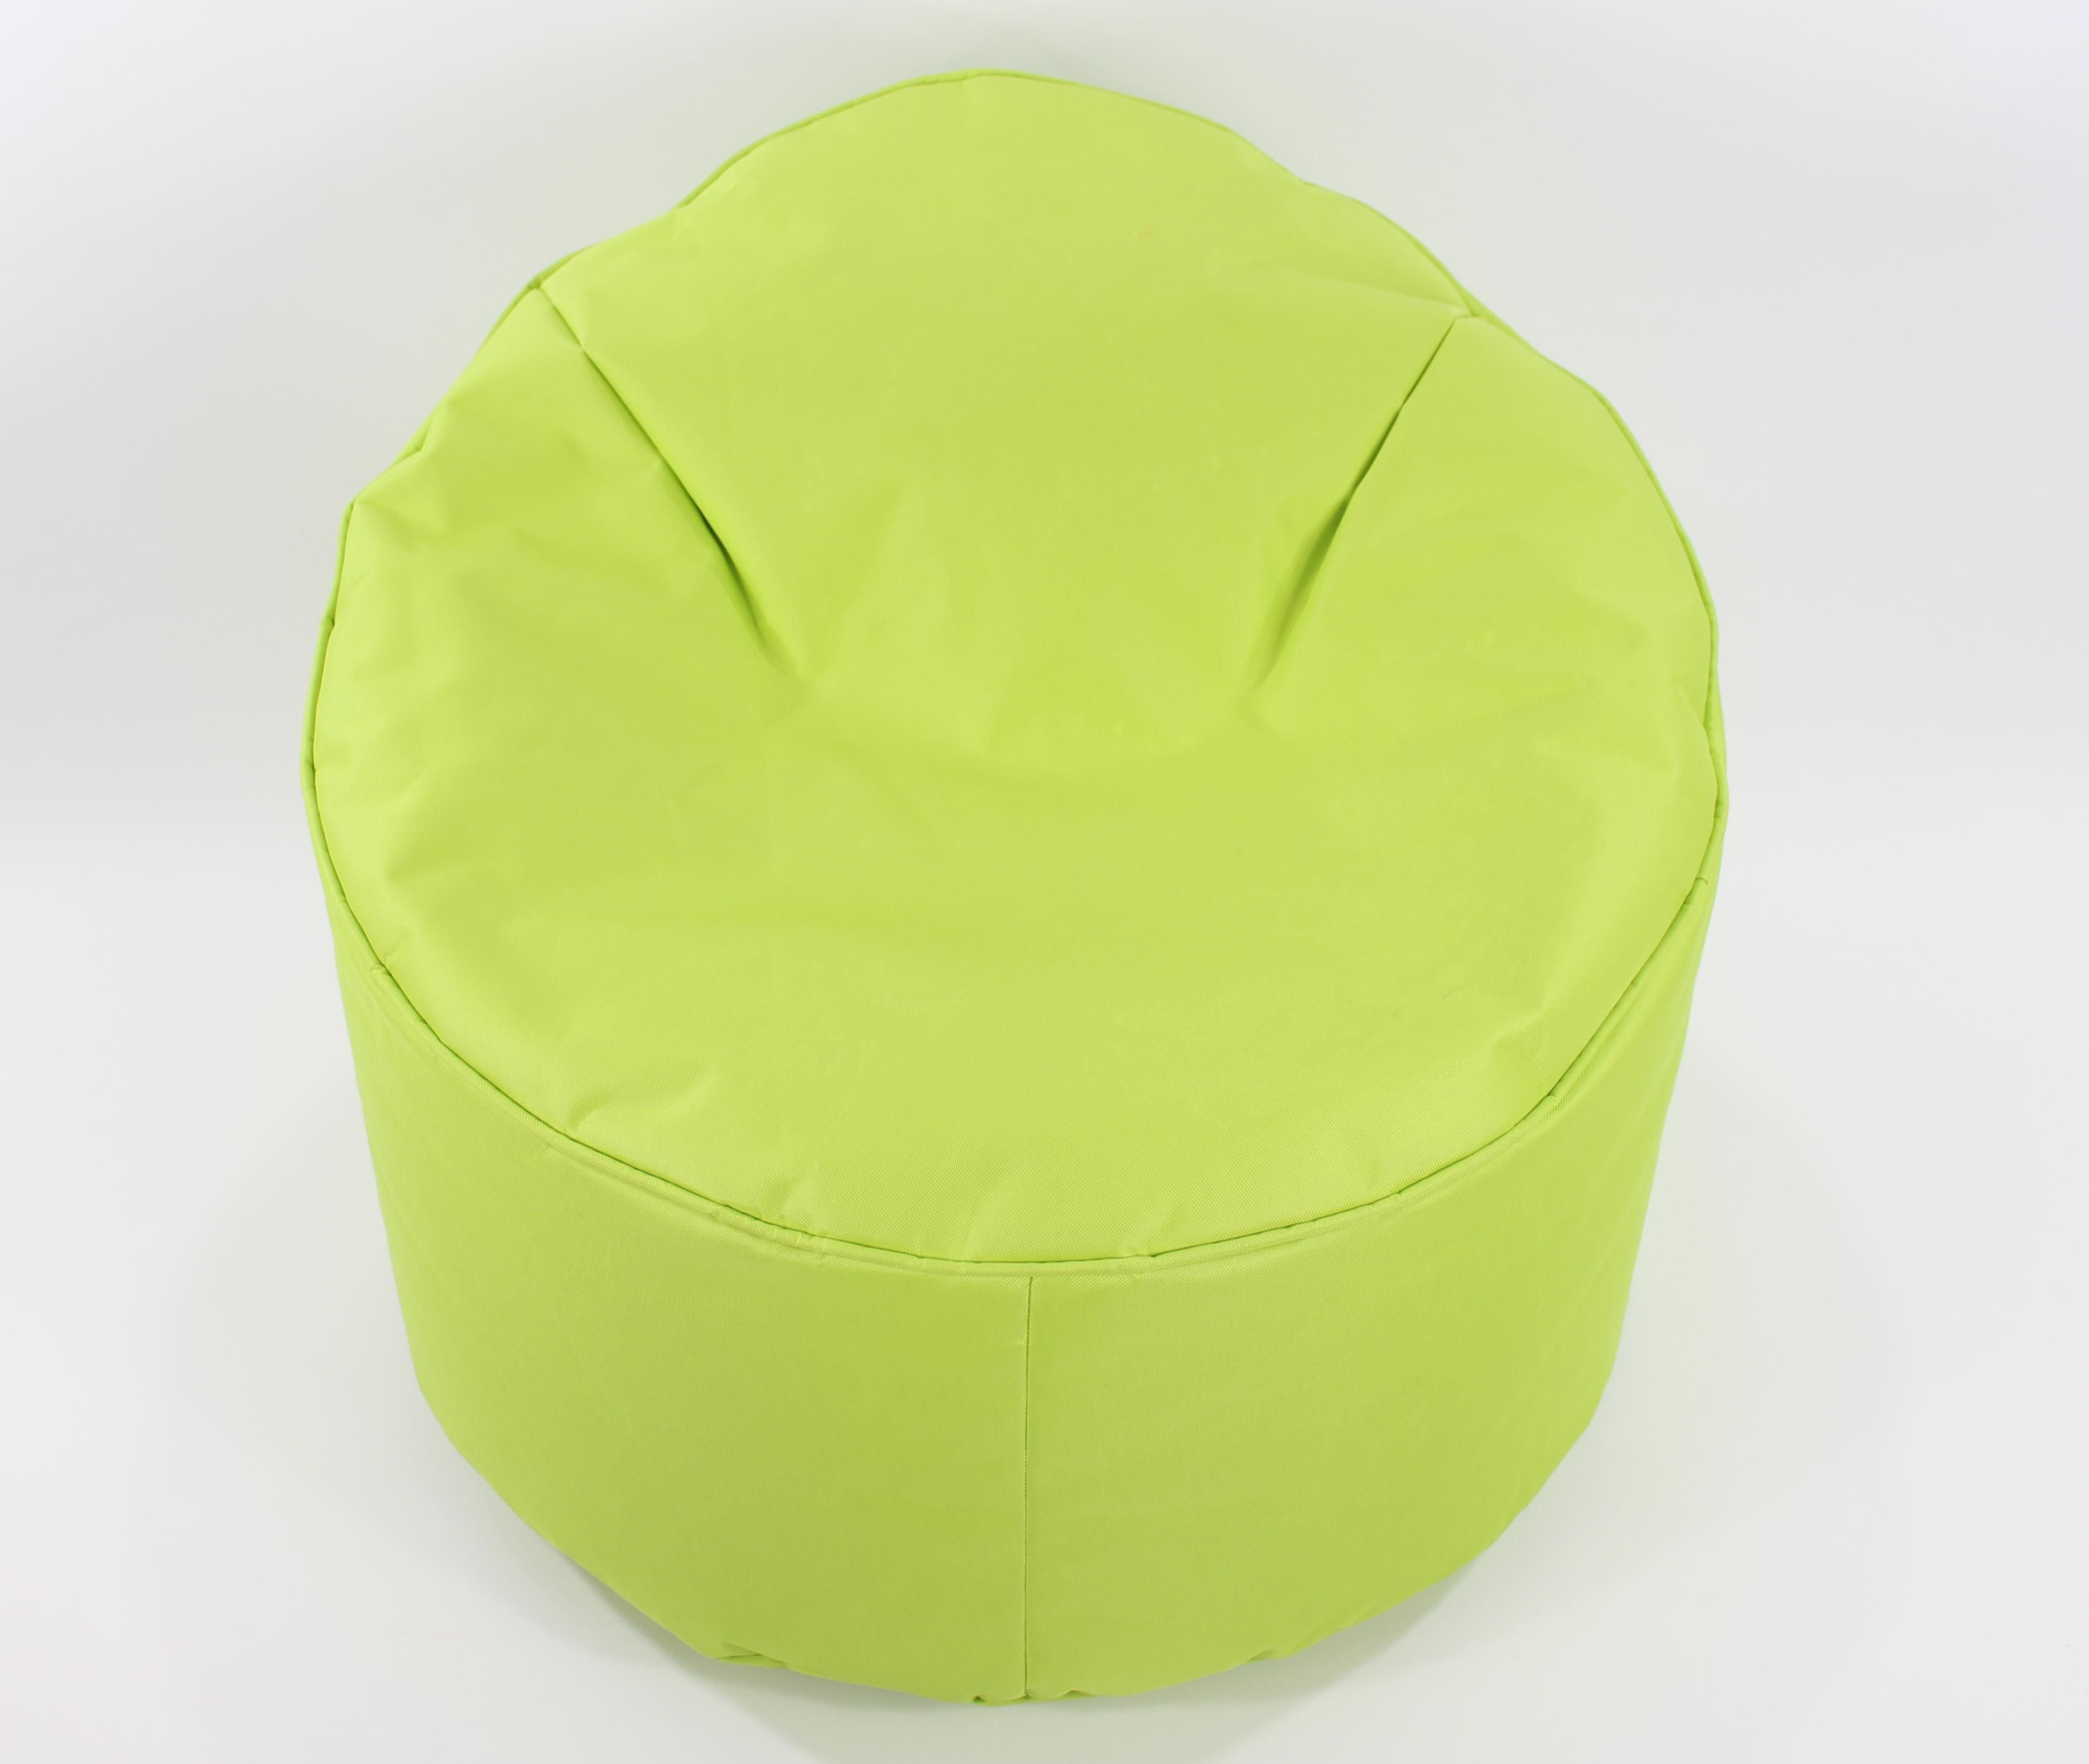 Kaikoo Cool Chill Outdoor Chair - Lime